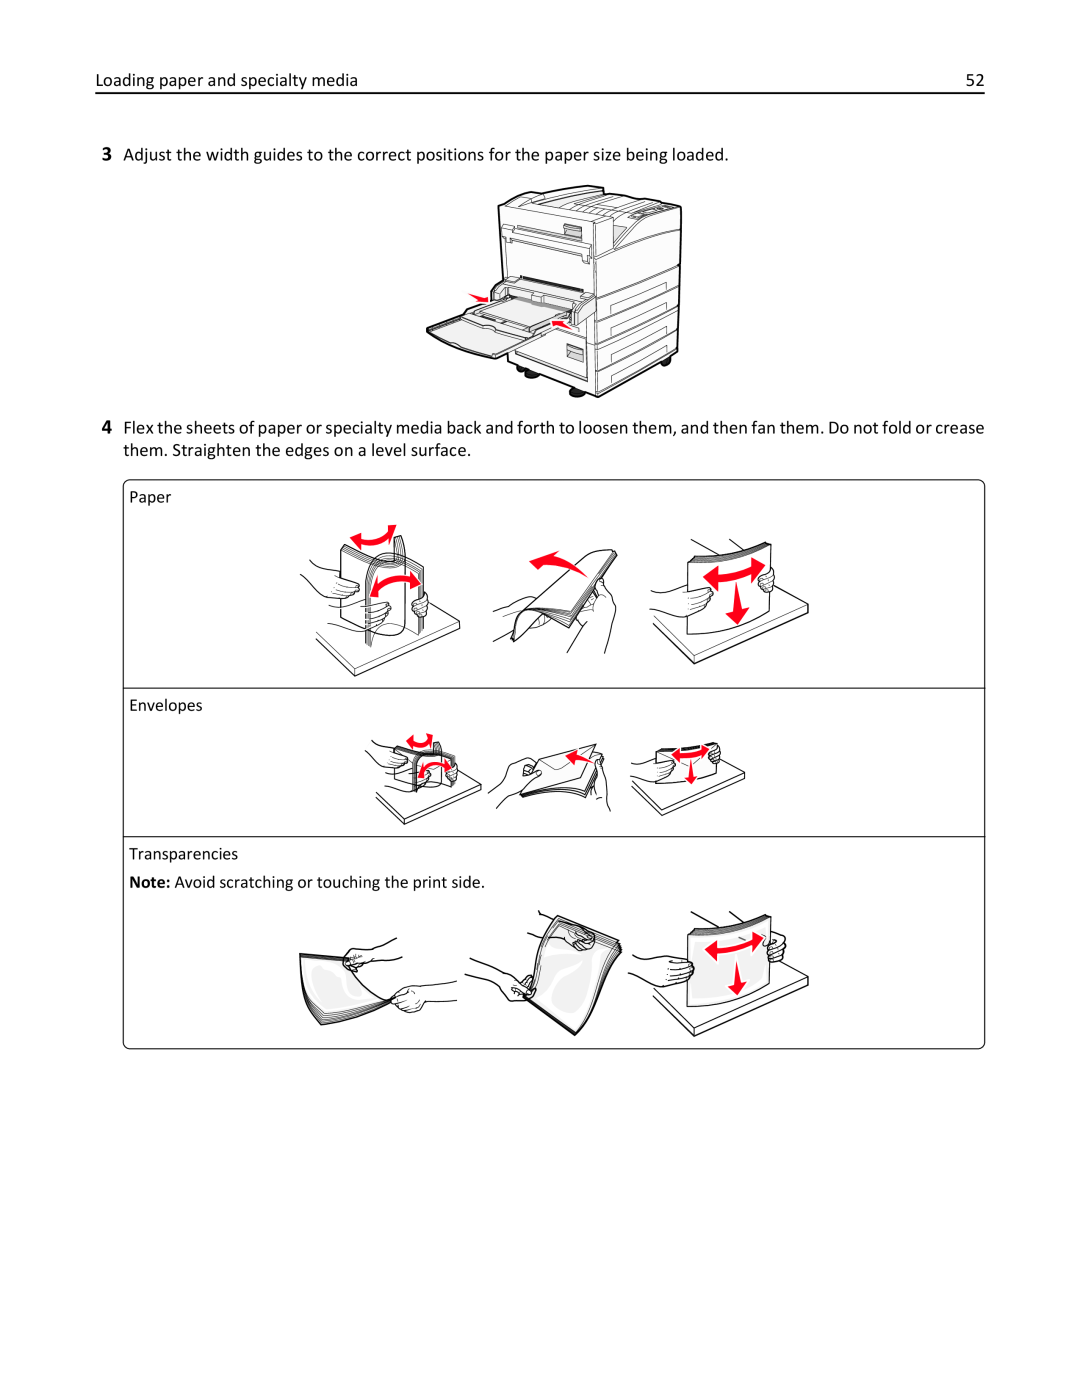 Lexmark W850DN, 110, 19Z0301 manual Paper Envelopes Transparencies, Note Avoid scratching or touching the print side 